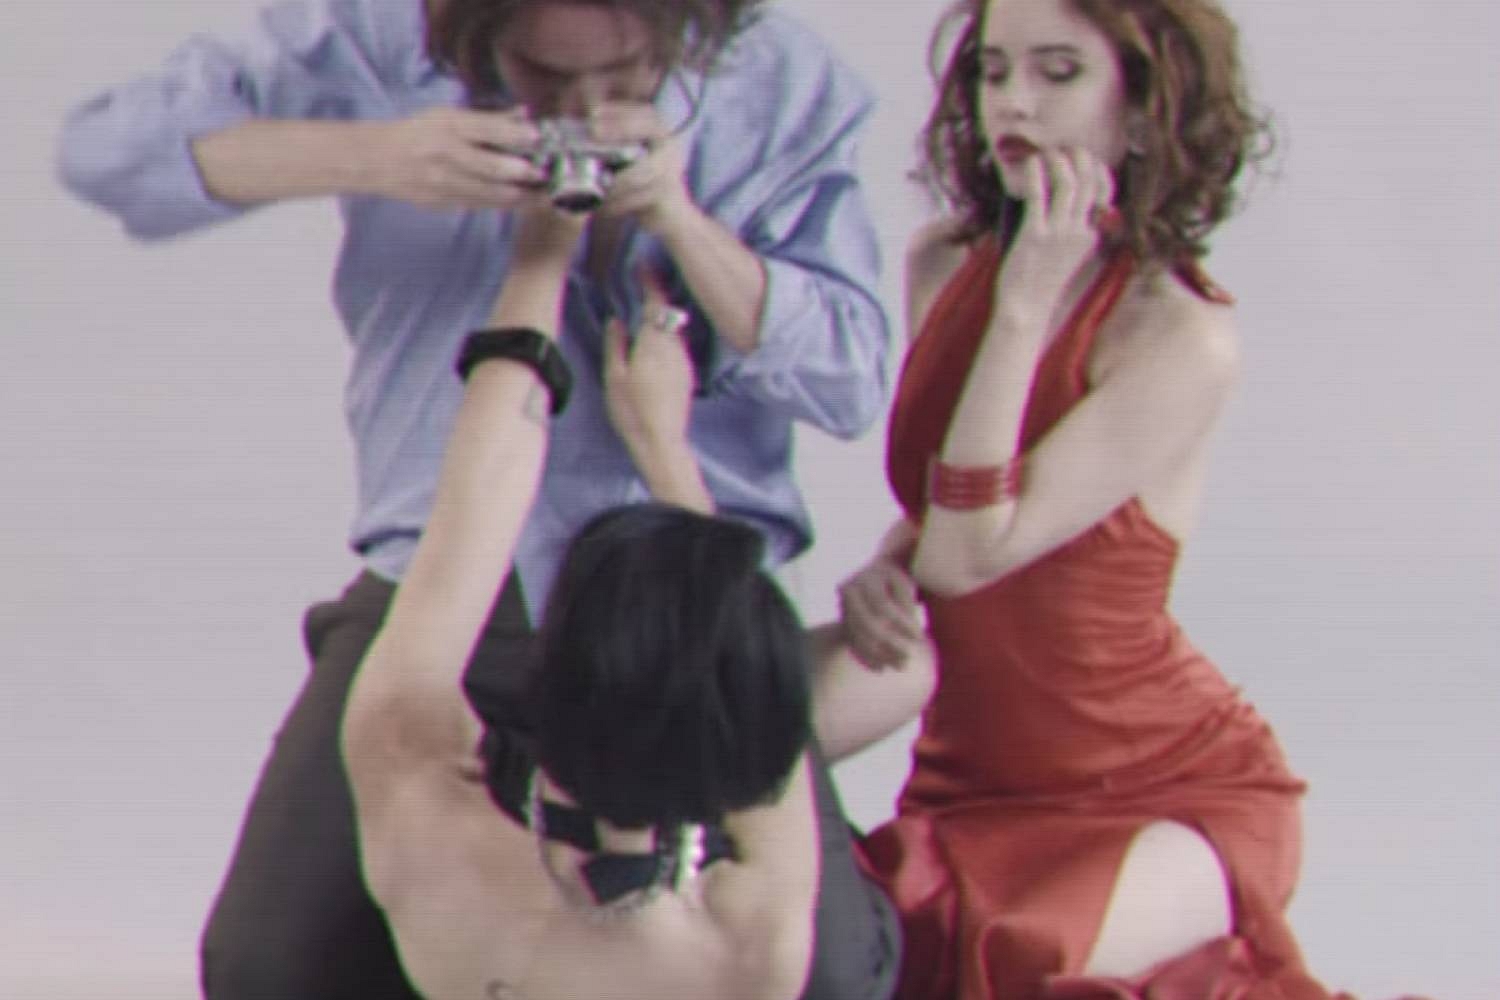 Watch Parquet Courts, Karen O and Daniele Luppi’s ‘Talisa’ video